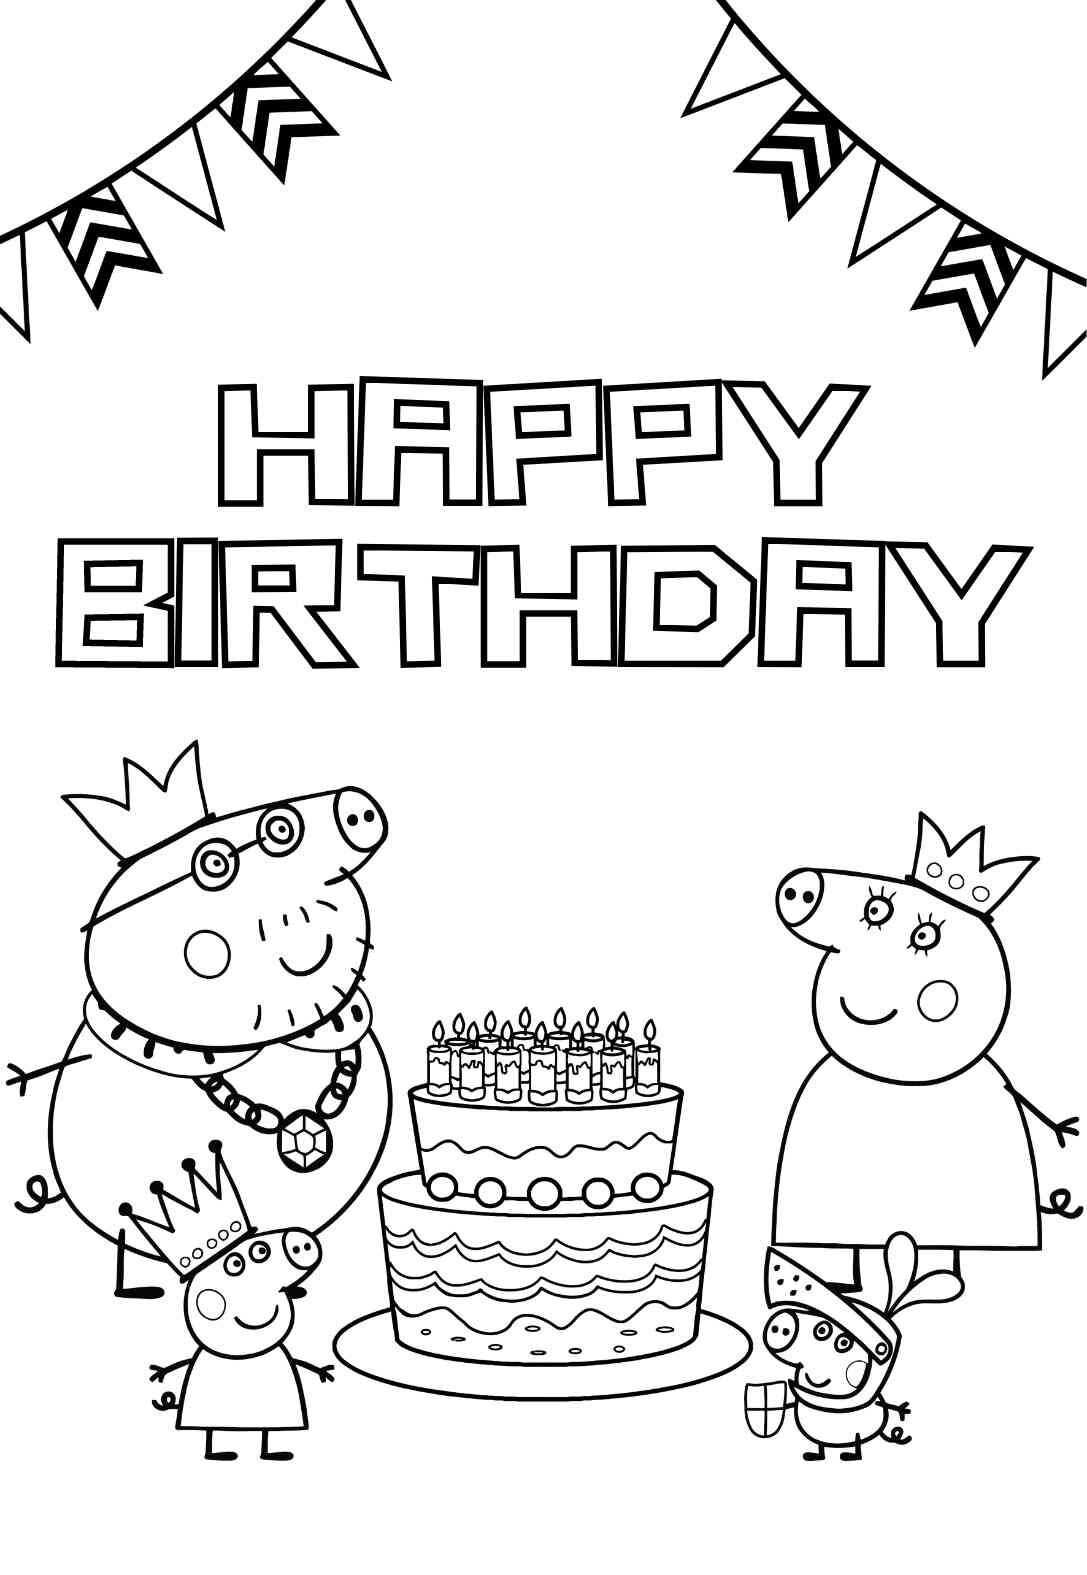 4-peppa-pig-themed-birthday-coloring-pages-cards-free